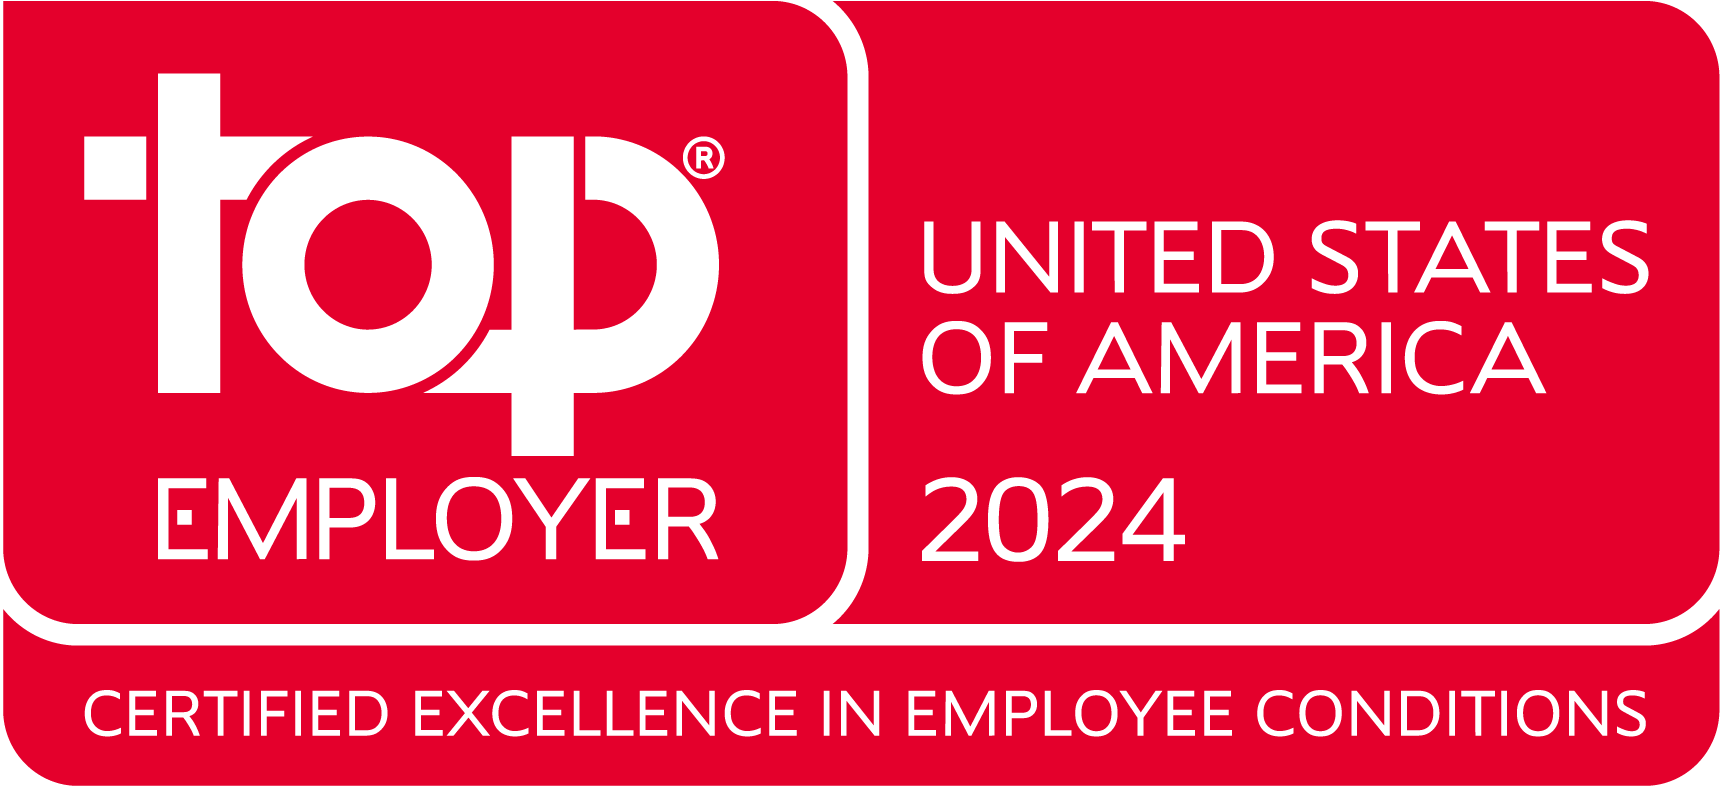 Top_Employer_United_States_of_America_2024.png